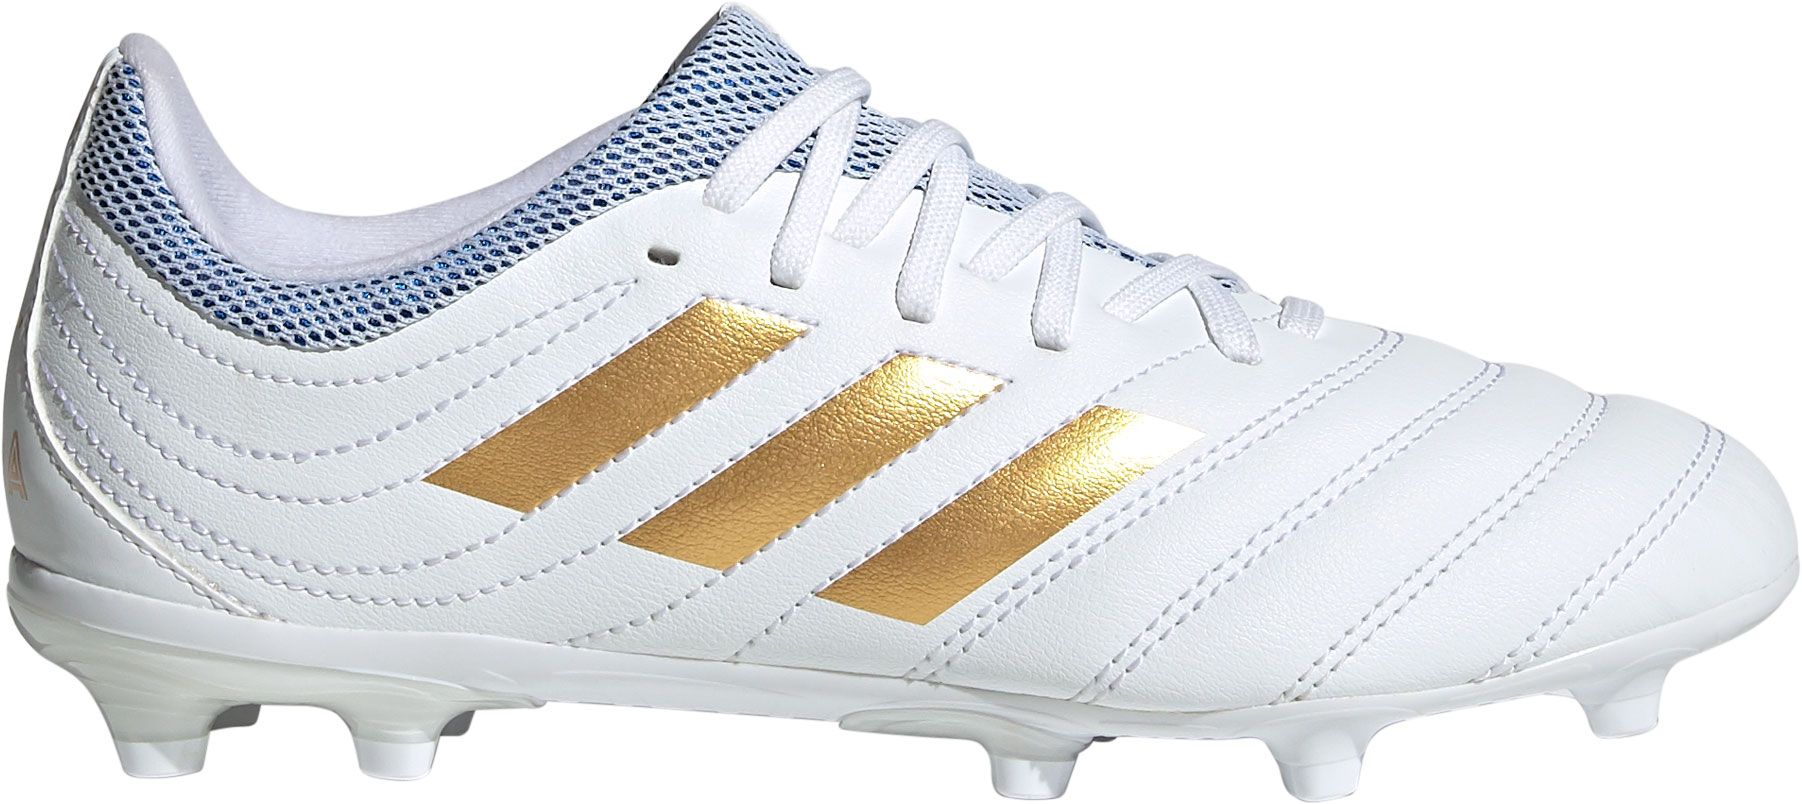 adidas soccer cleats white and gold